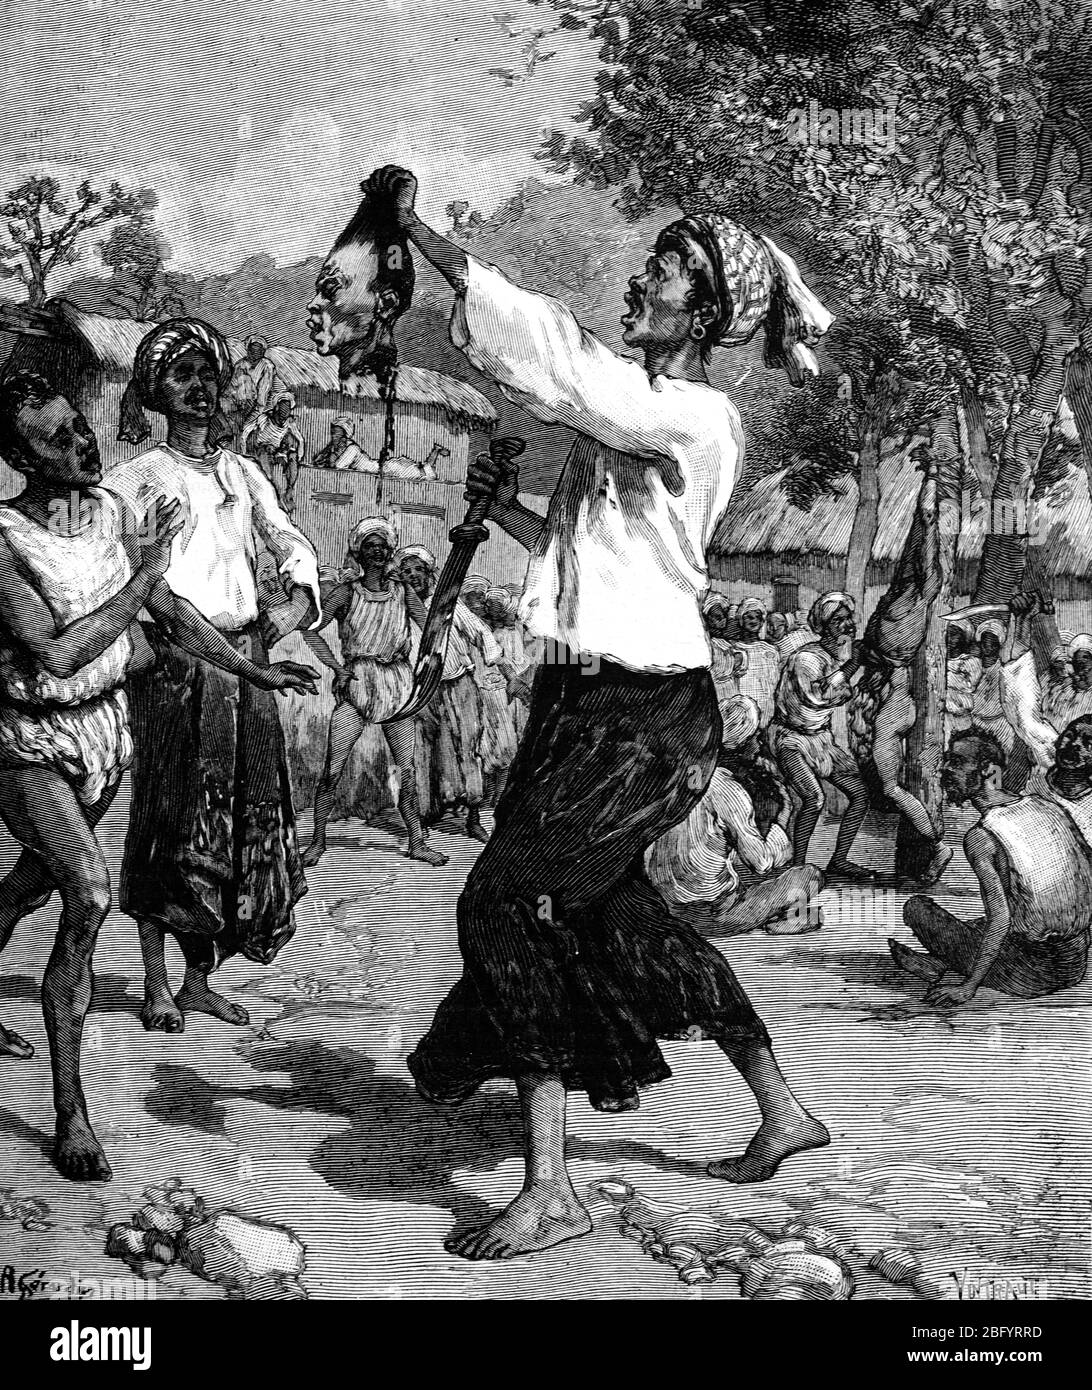 Headhunters among the Acehnese People or Tribe, aka Atjehnese or Achinese, Aceh Sumatra Indonesia. Vintage or Old Illustration or Engraving 1890 Stock Photo